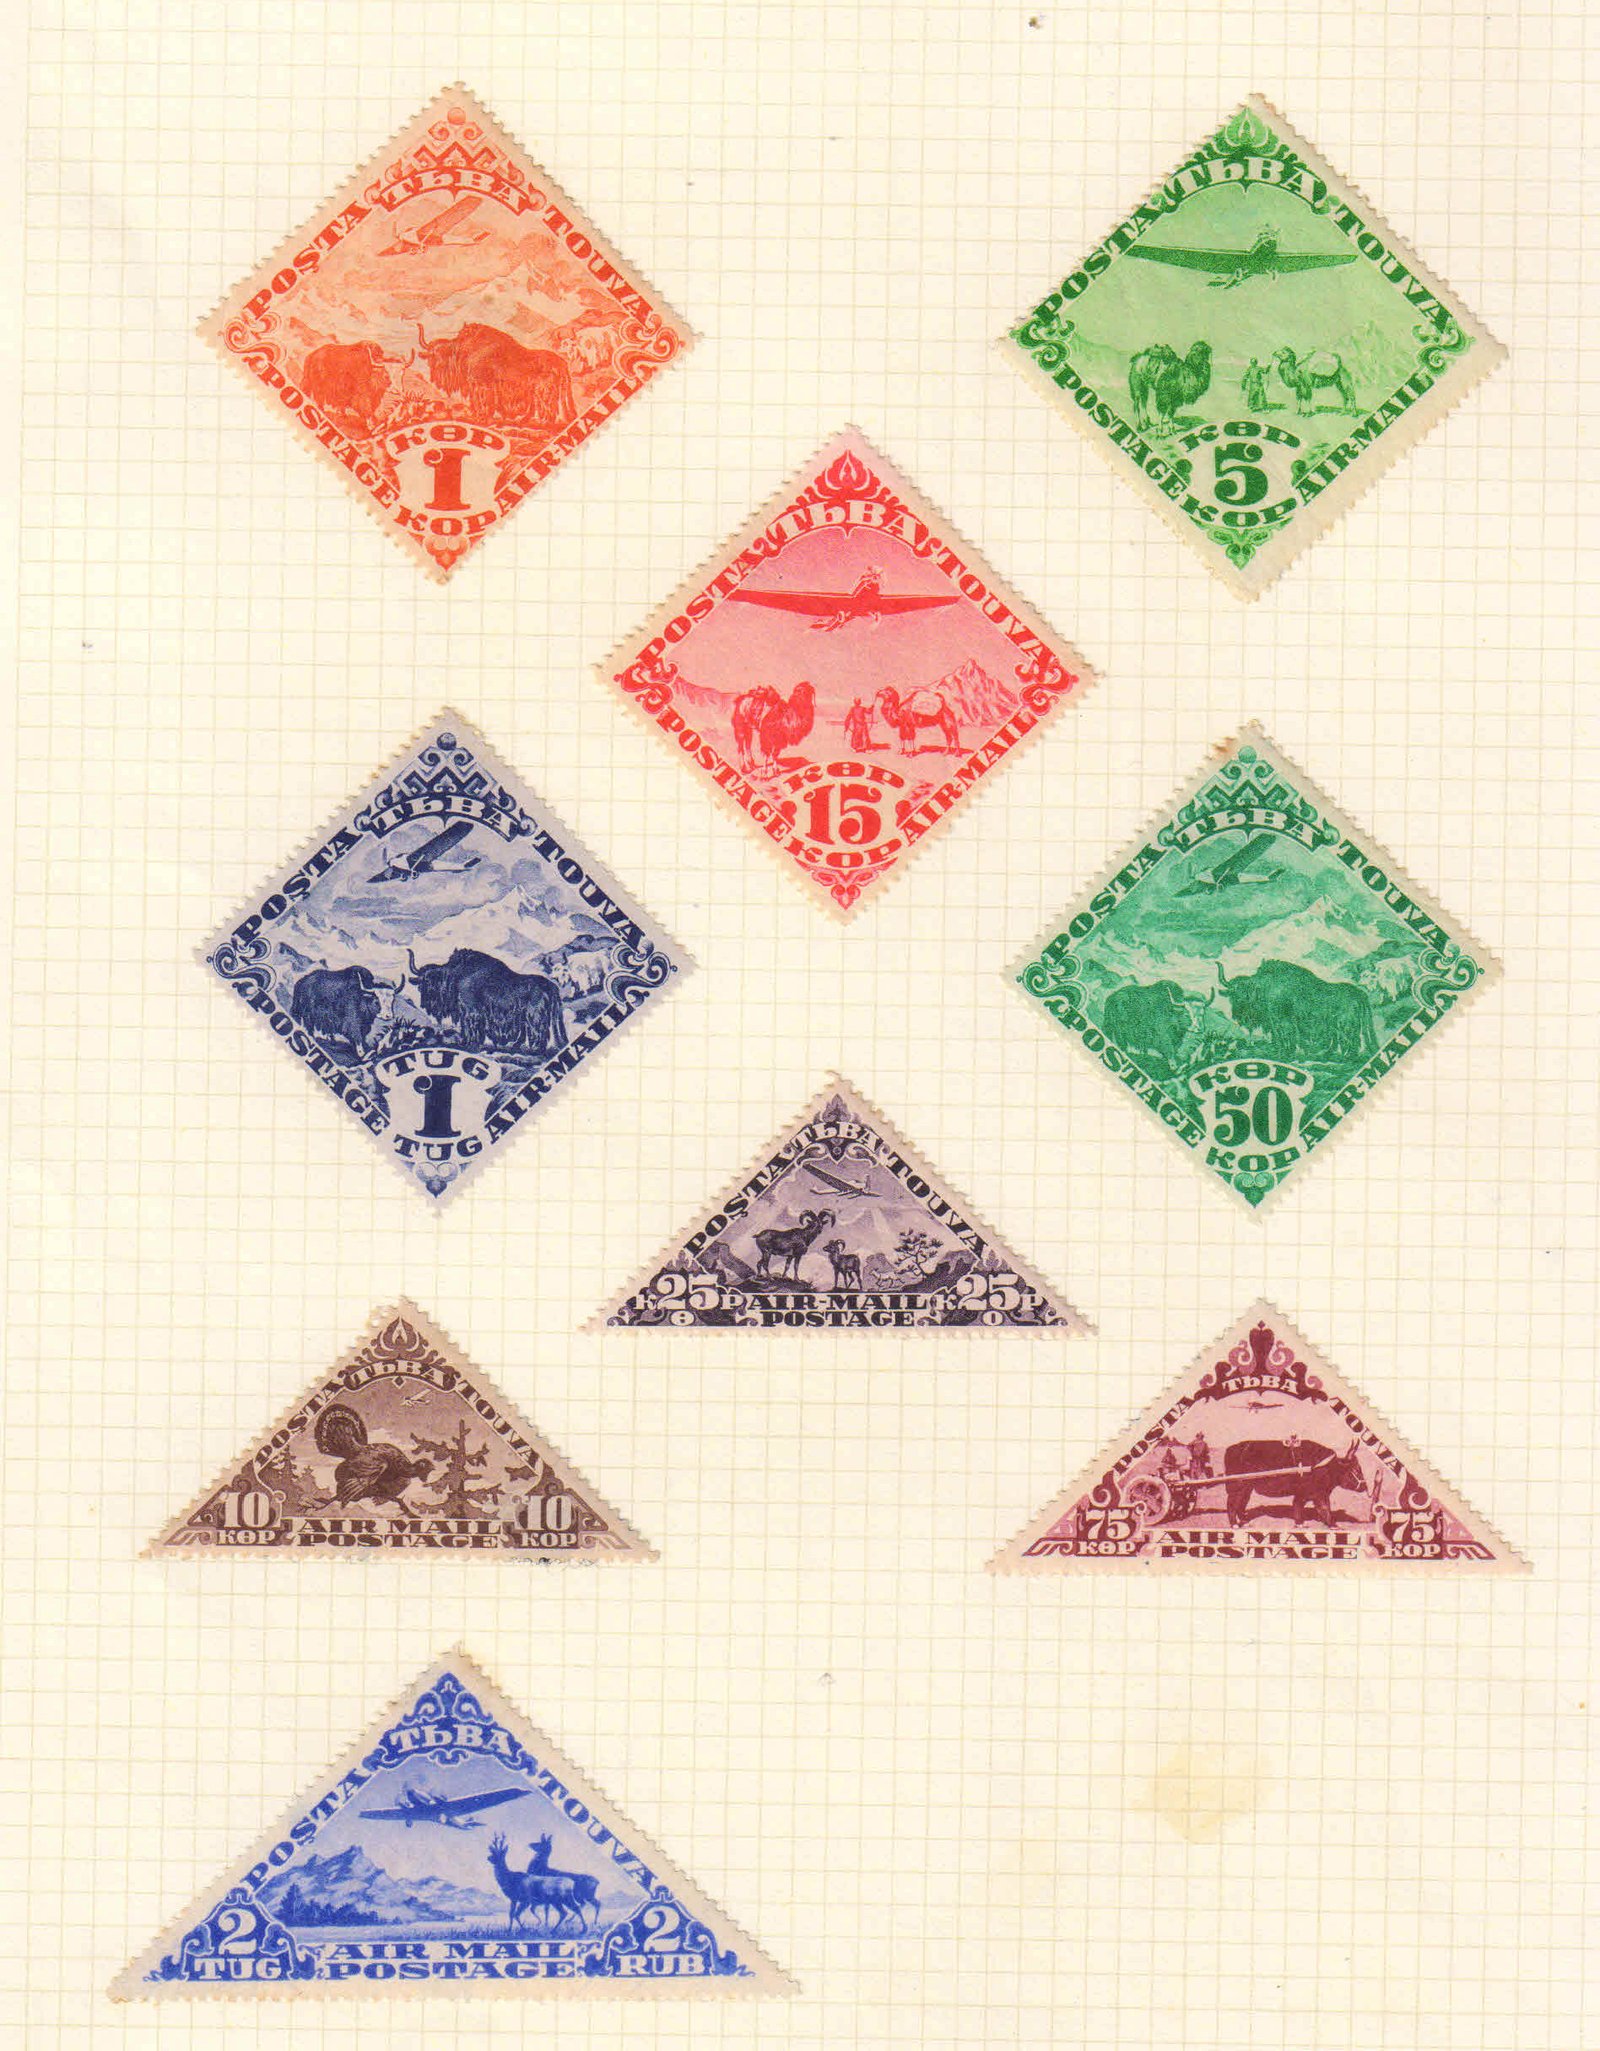 TUVA 1934-Aircrafts over Animals, Triangulars & Diamond Shaped, Set of 9, Mint Hinged, S.G. 51-59a, Cat £ 54-